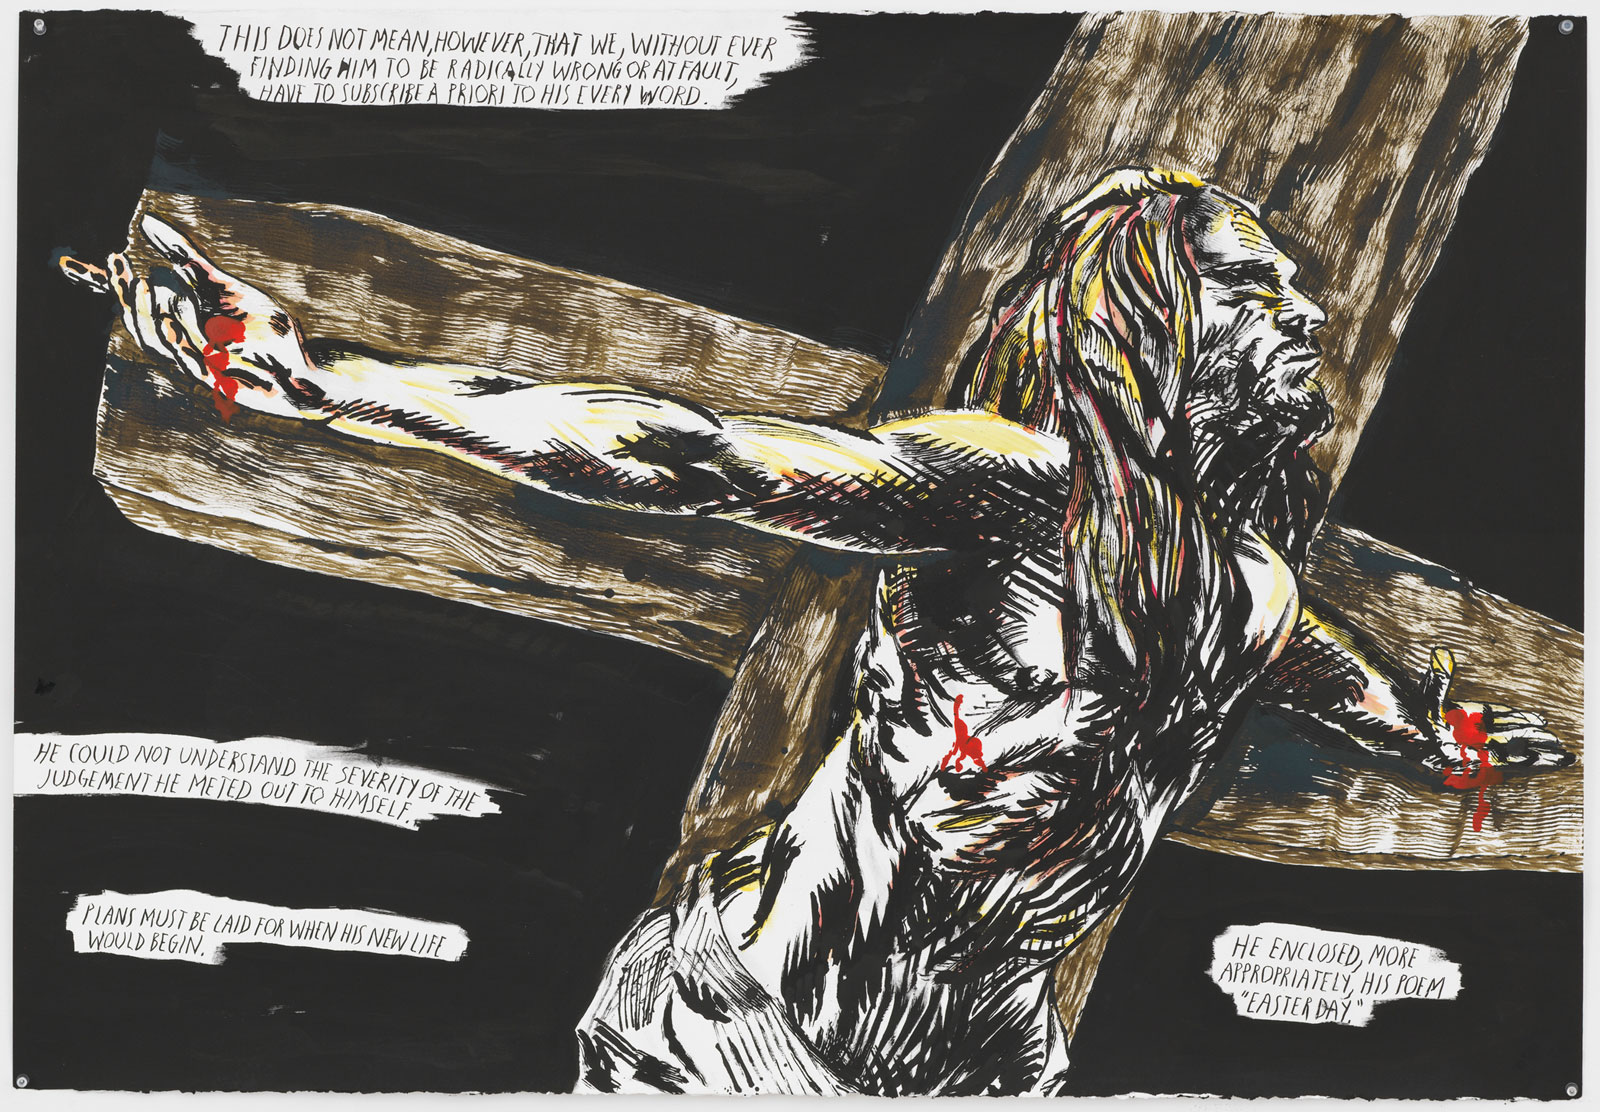 Pettibon's World | by Robert Storr | NYR Daily | The New York Review of Books